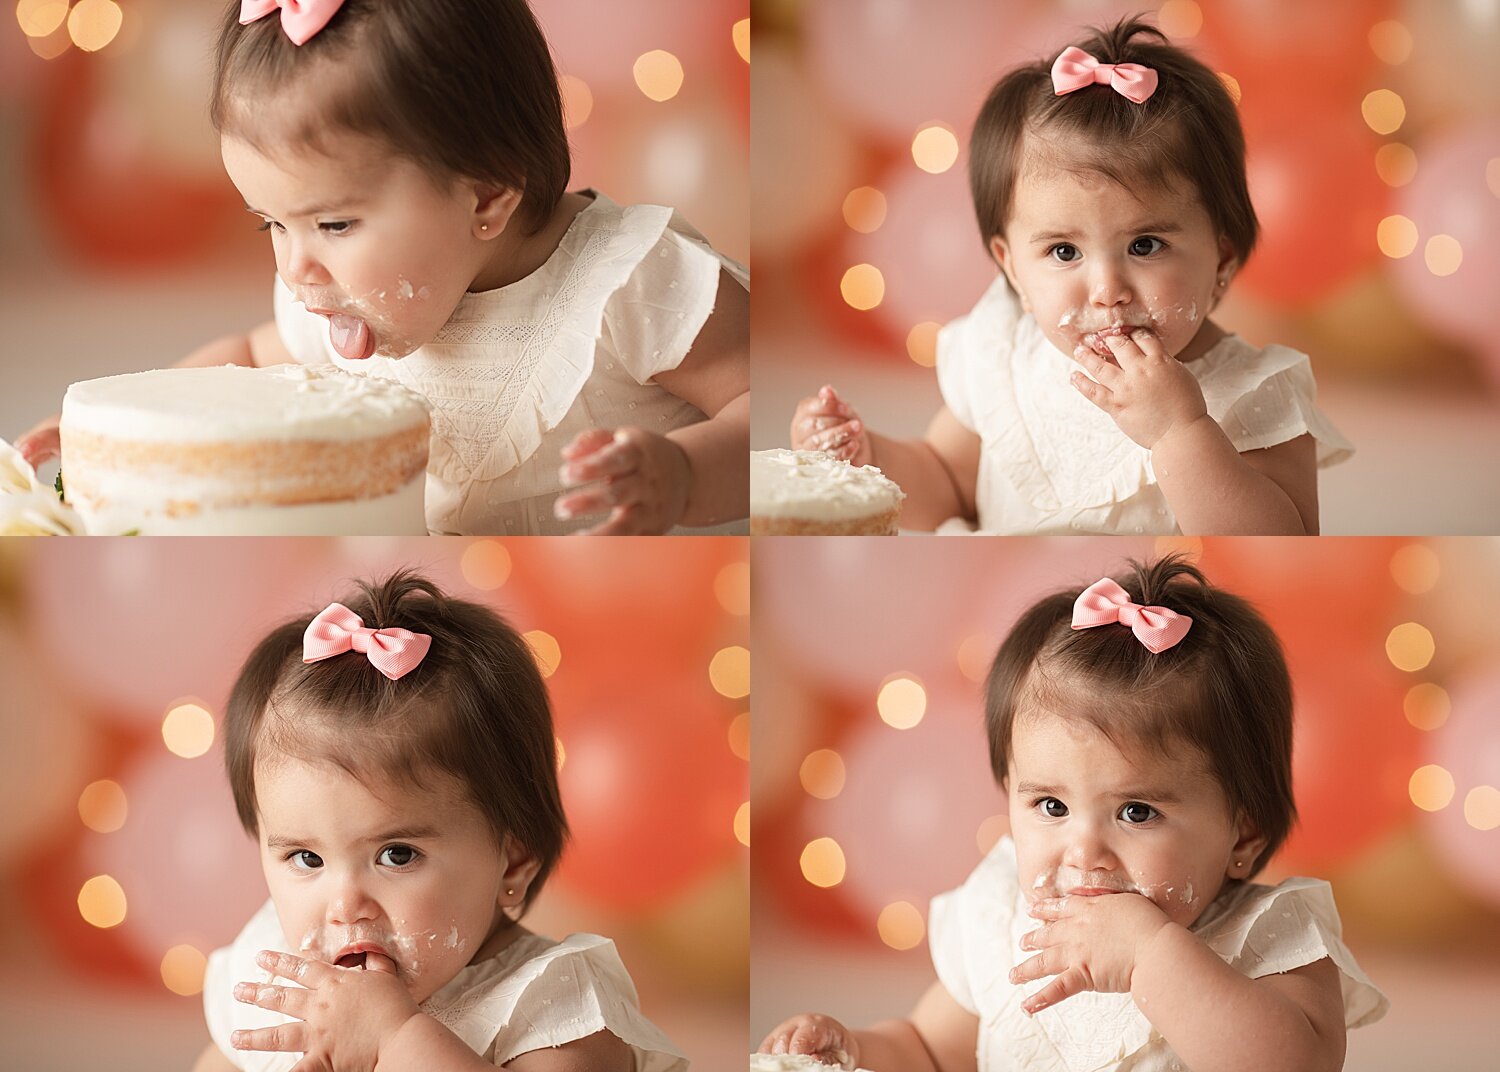 St. Cloud cake smash photographer, baby girl with balloons and cake